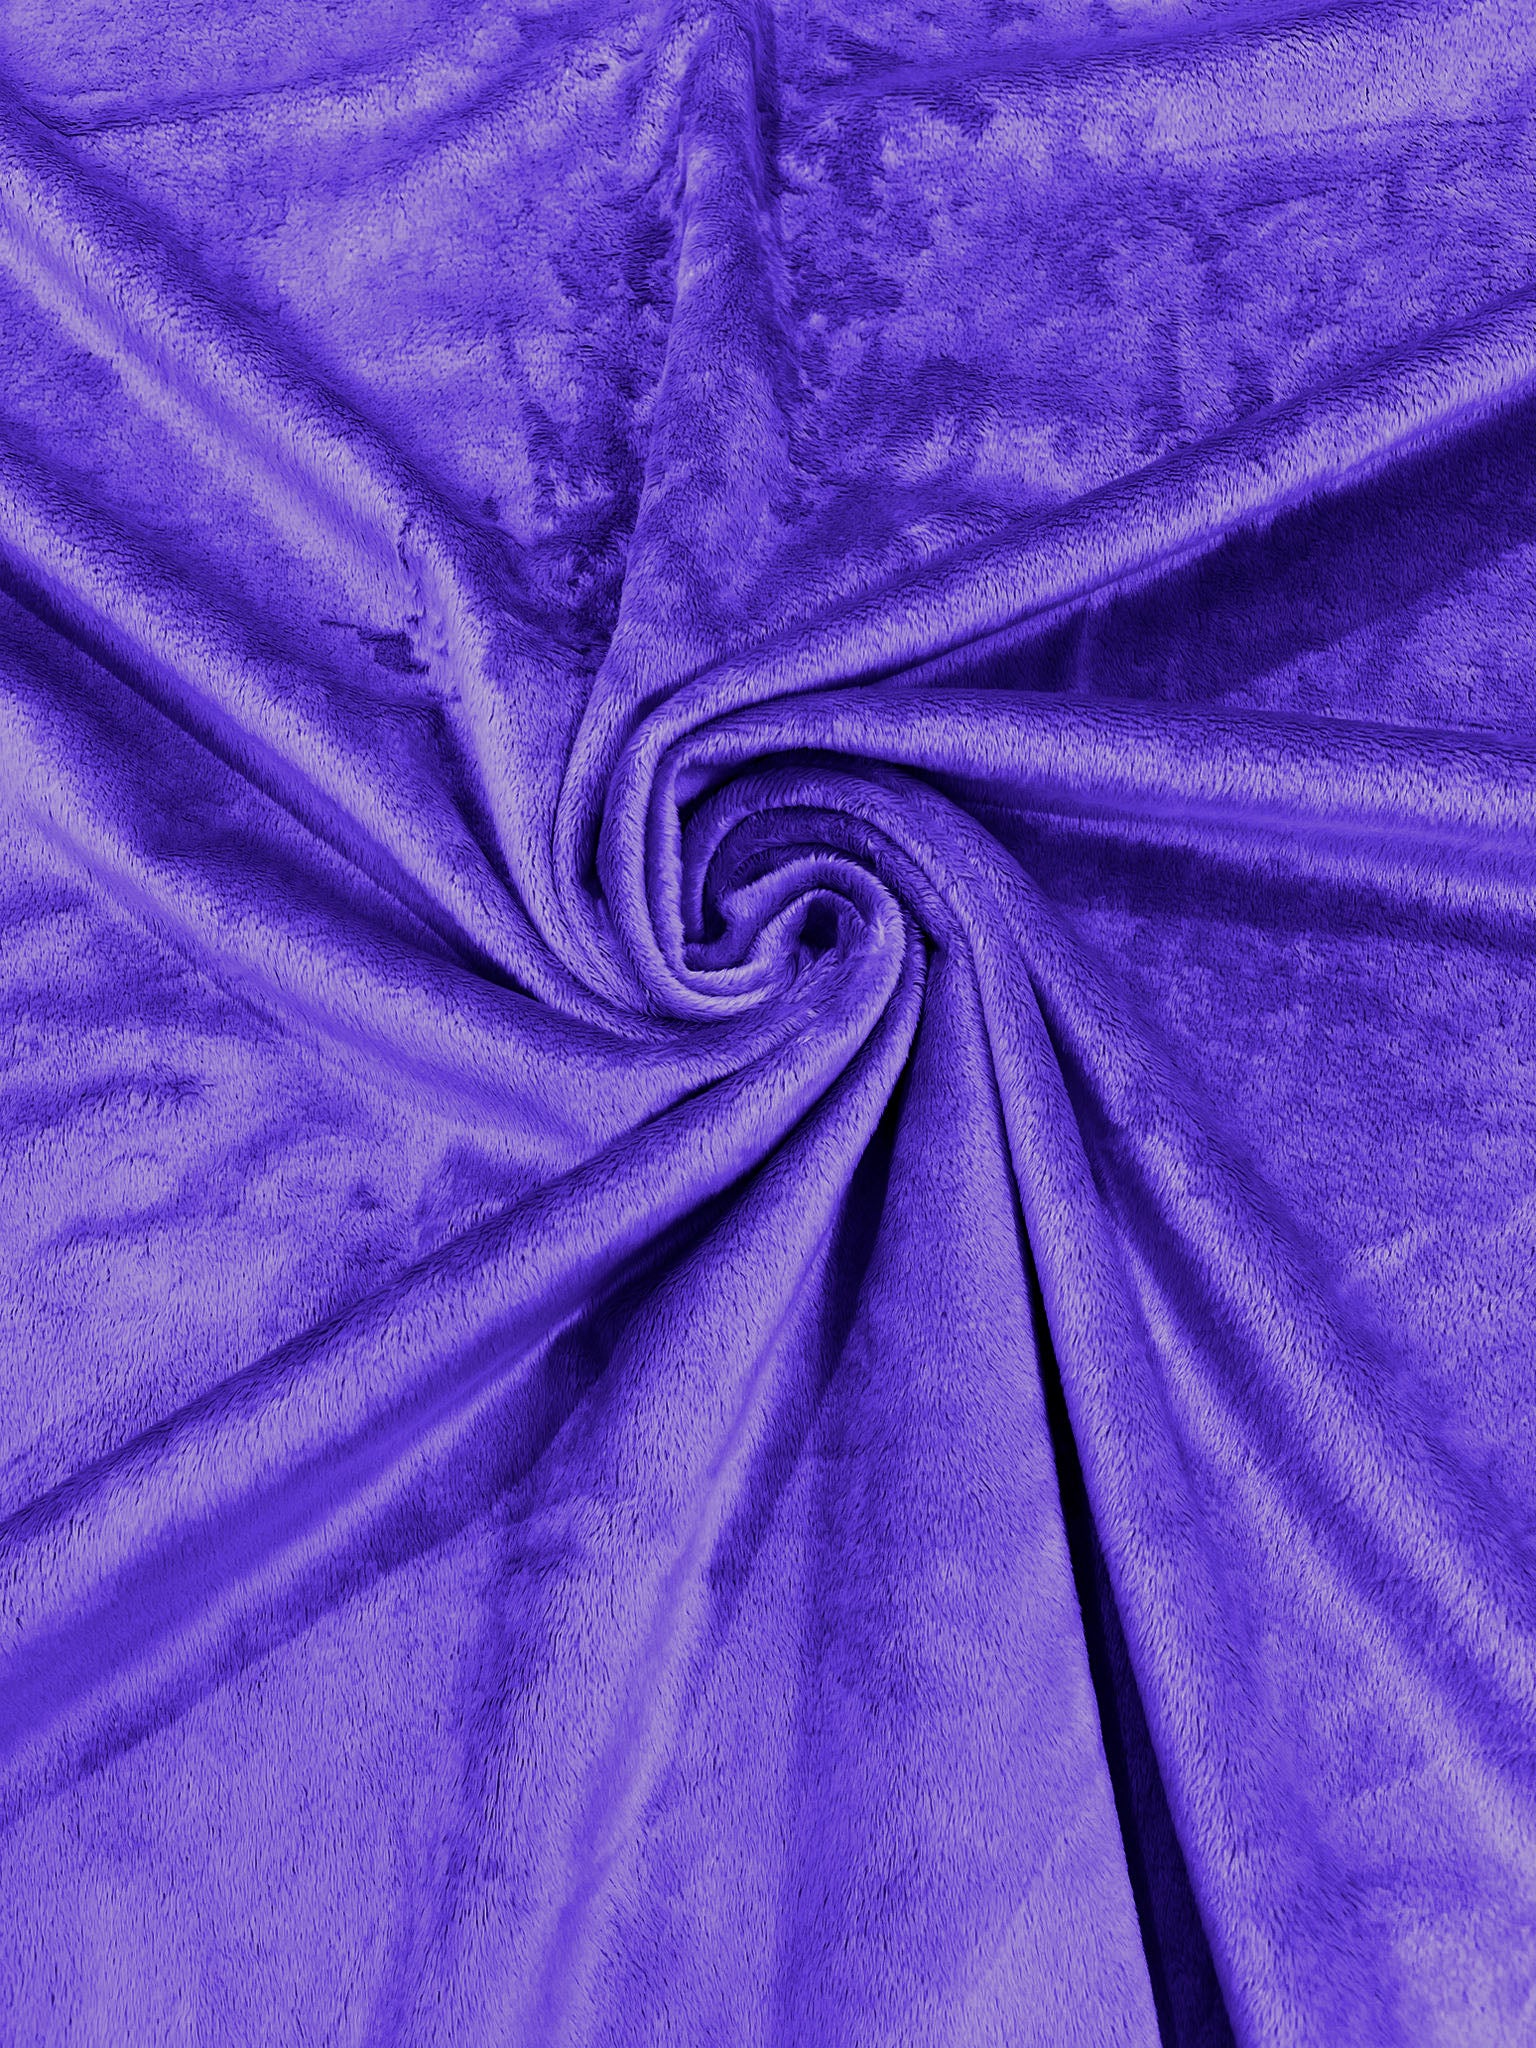 Purple Minky Smooth Soft Solid Plush Faux Fake Fur Fabric Polyester- Sold by the yard.